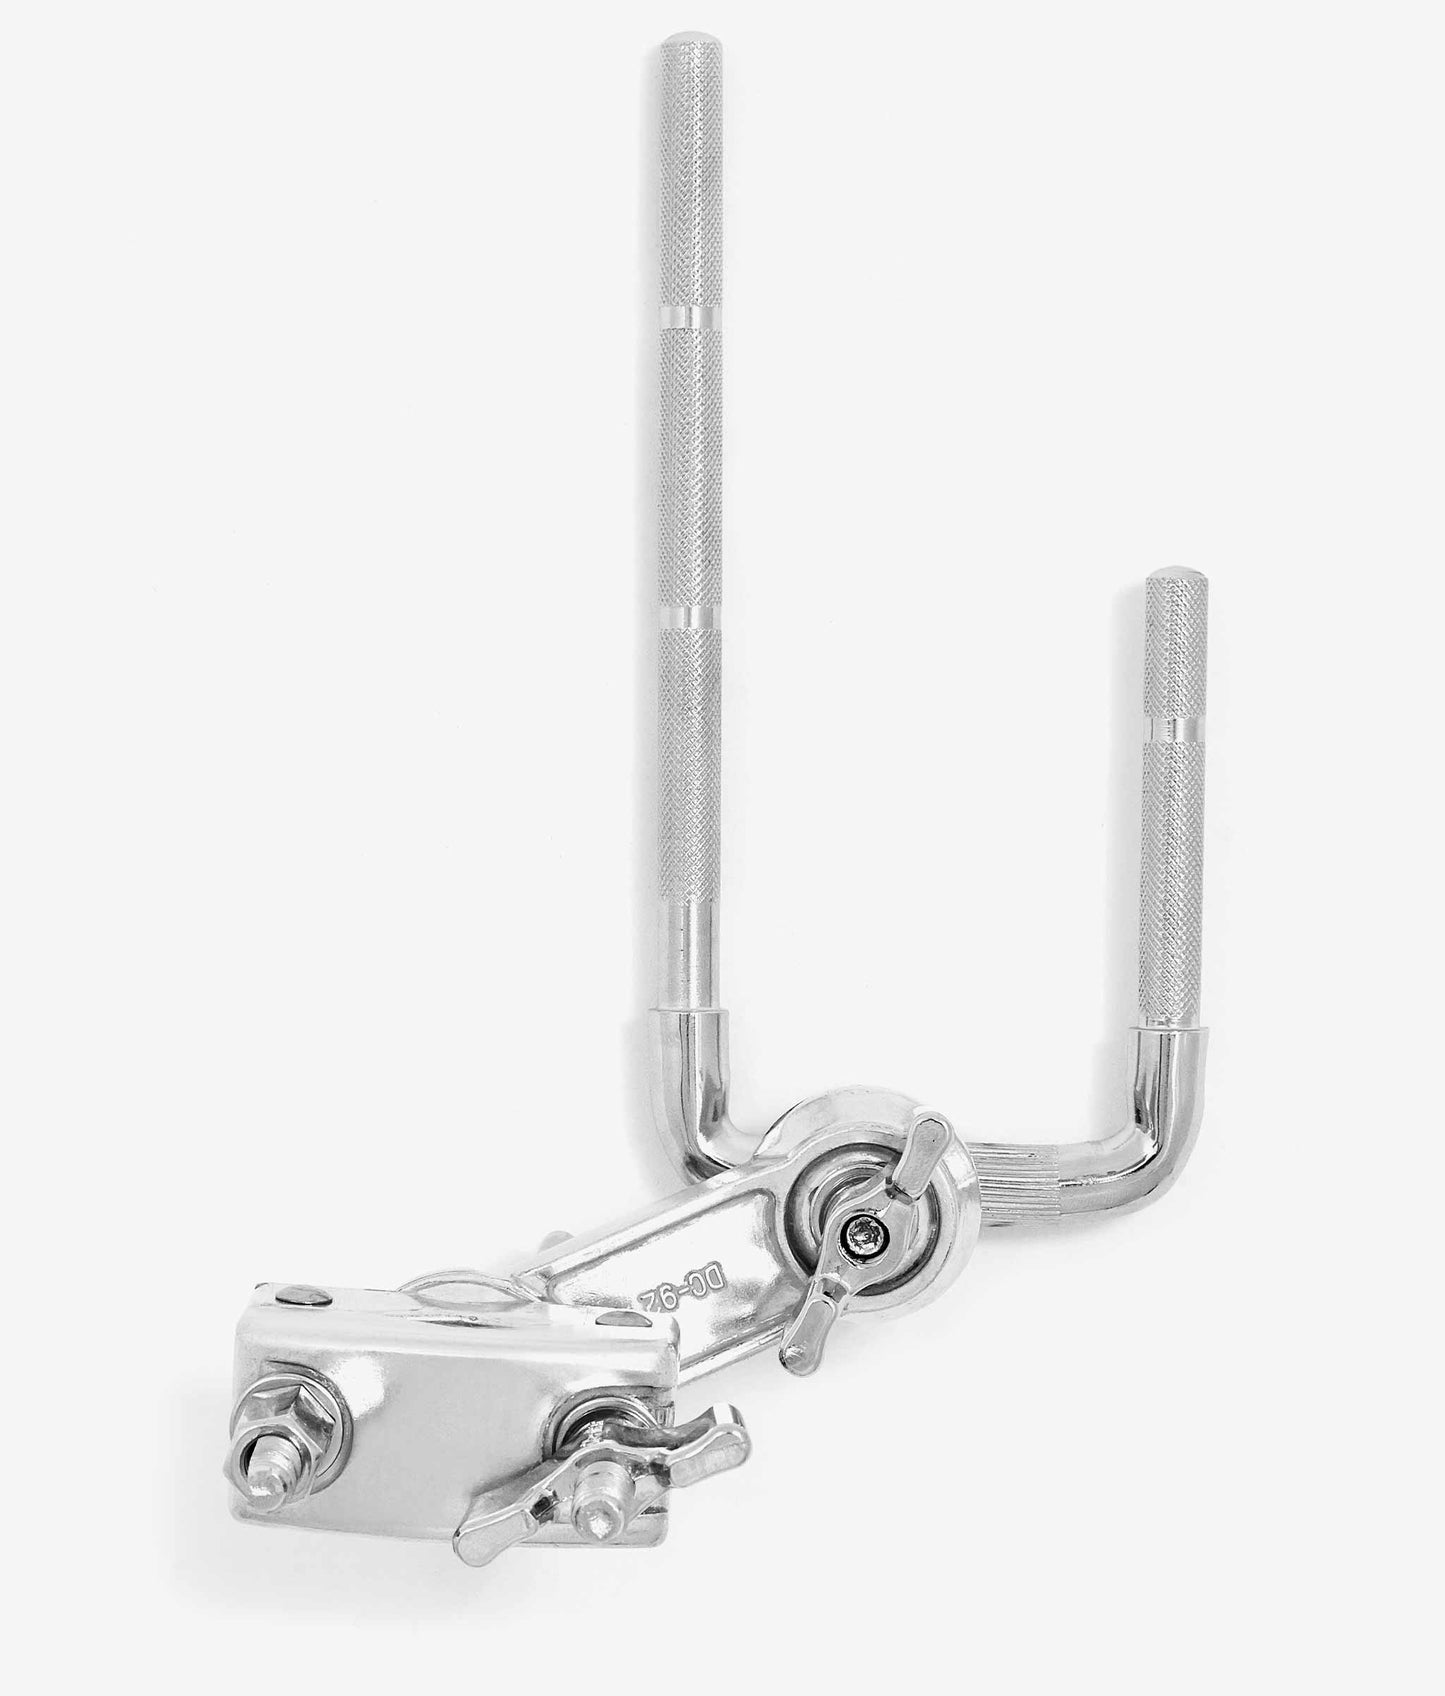  Gibraltar SC-DPLAC Twin 9.5mm L-Arm and Clamp for Electronic Drum Pads / Accessories percussion accessory